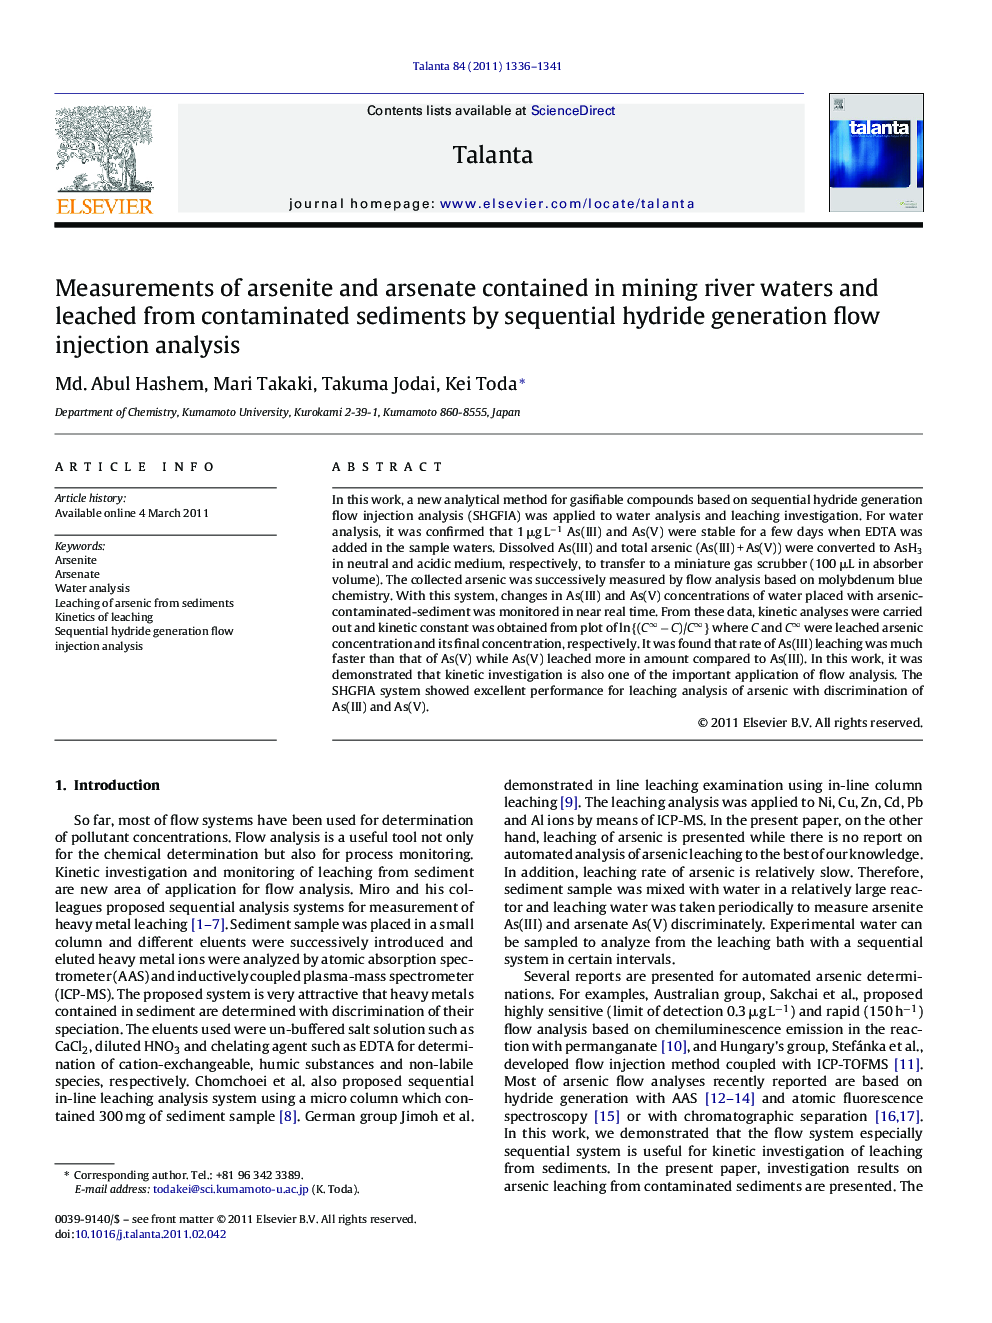 Measurements of arsenite and arsenate contained in mining river waters and leached from contaminated sediments by sequential hydride generation flow injection analysis